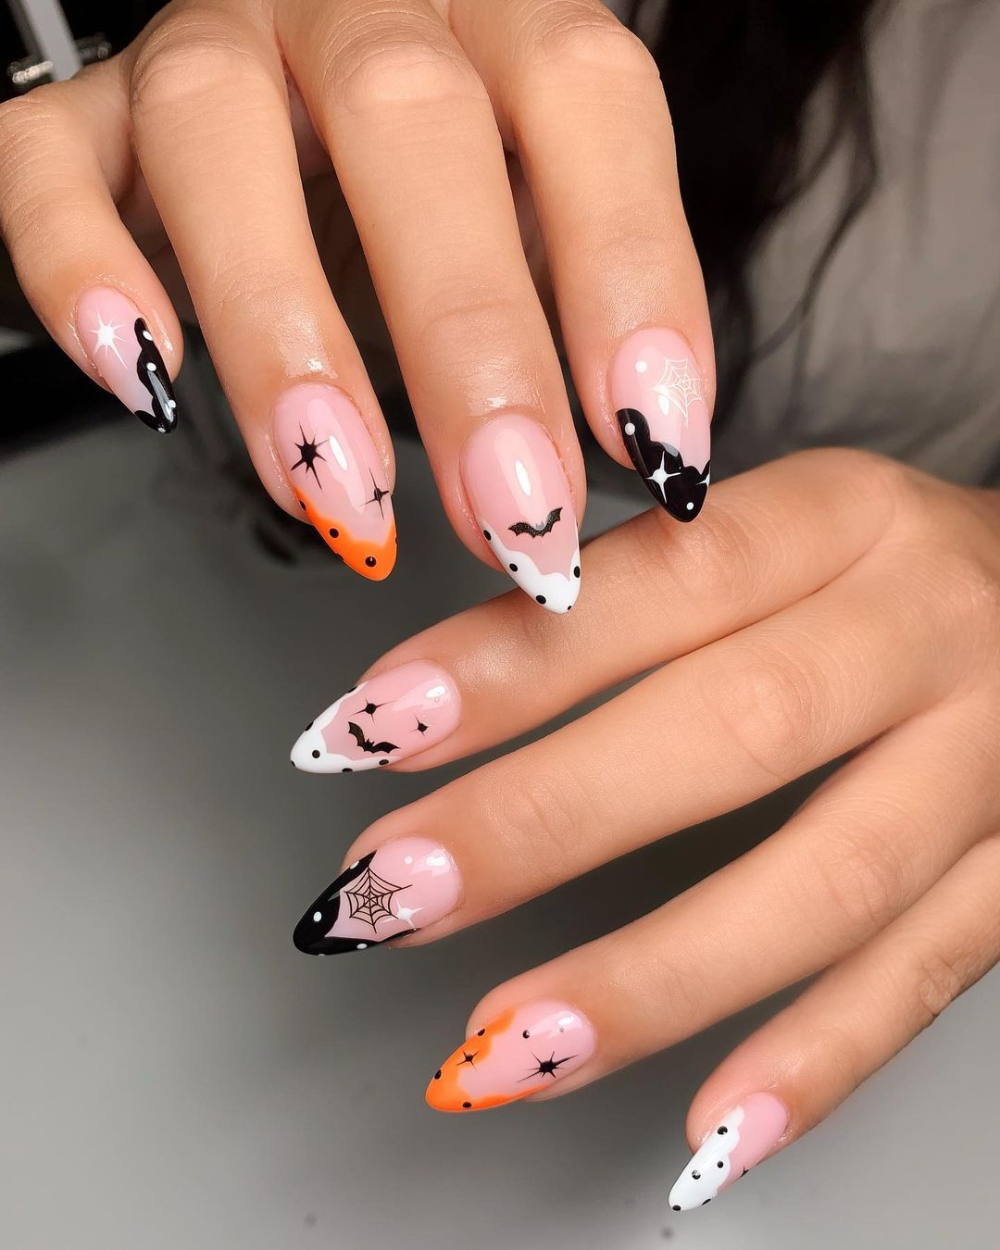 Spooky and Stylish Halloween Nail Art Designs